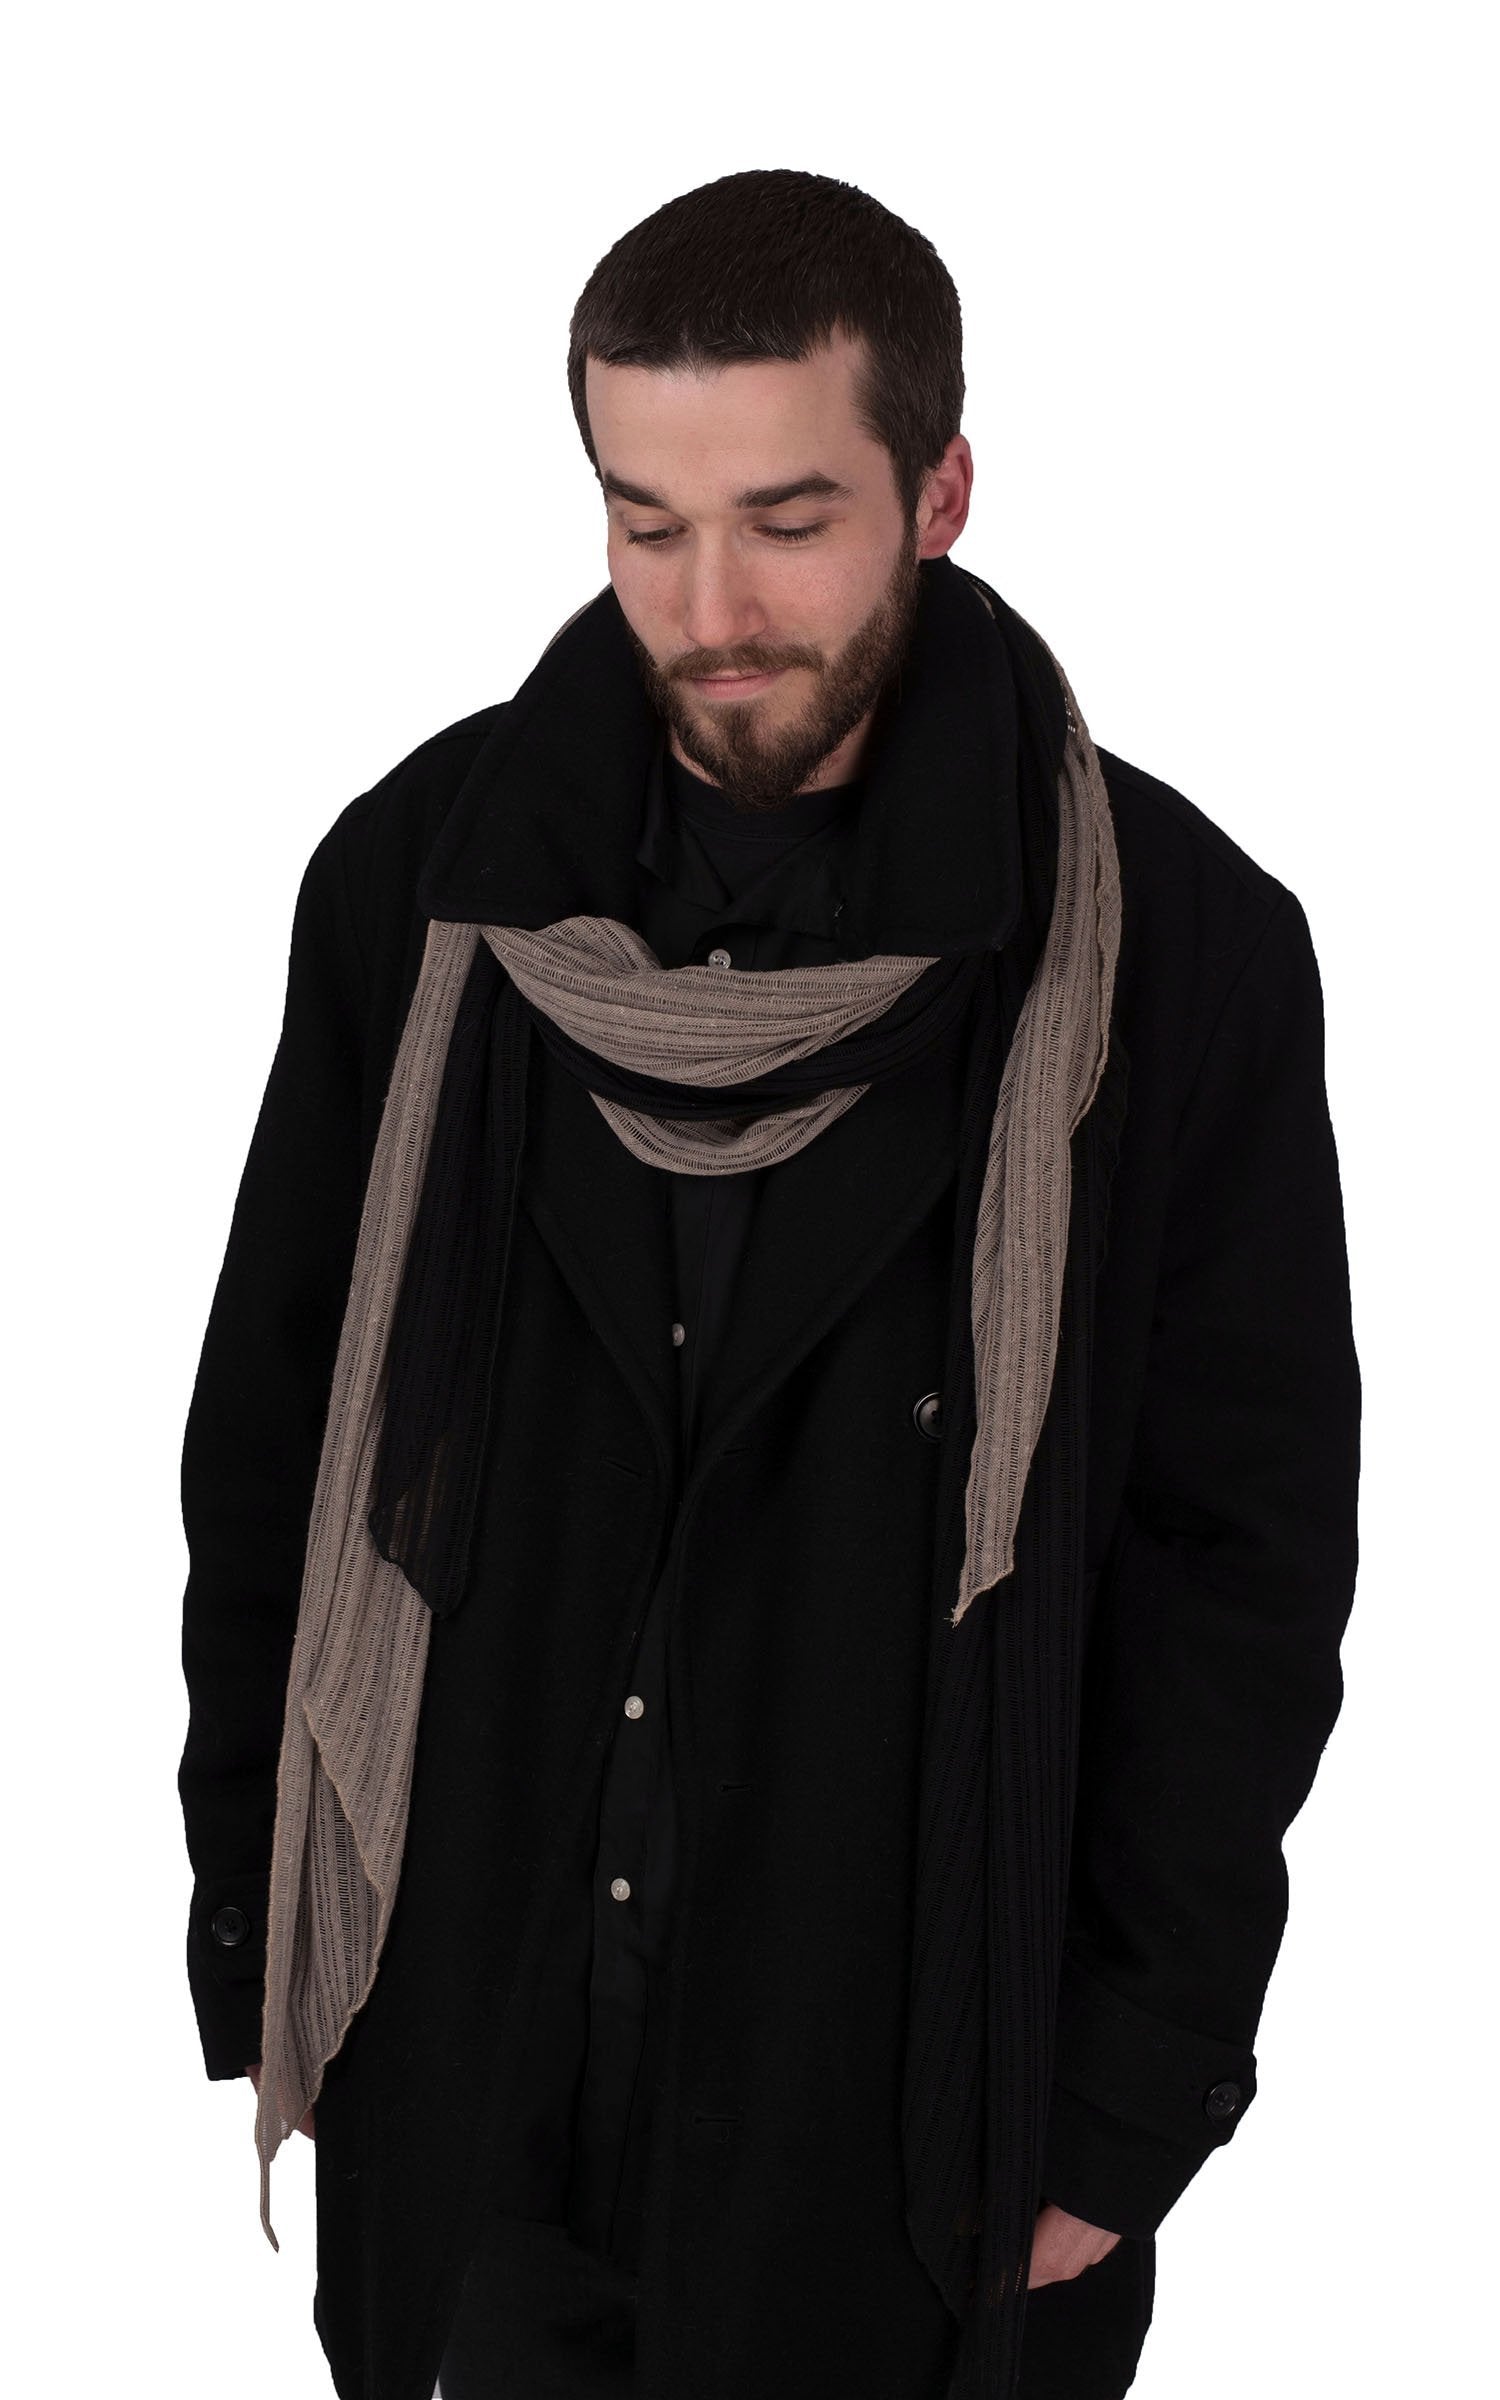 Men’s Large Handkerchief Scarf, Wrap on Mannequin shown | Cotton Voile, Black with Rain (Charcoal, gray ) | Handmade in Seattle WA | Pandemonium Millinery